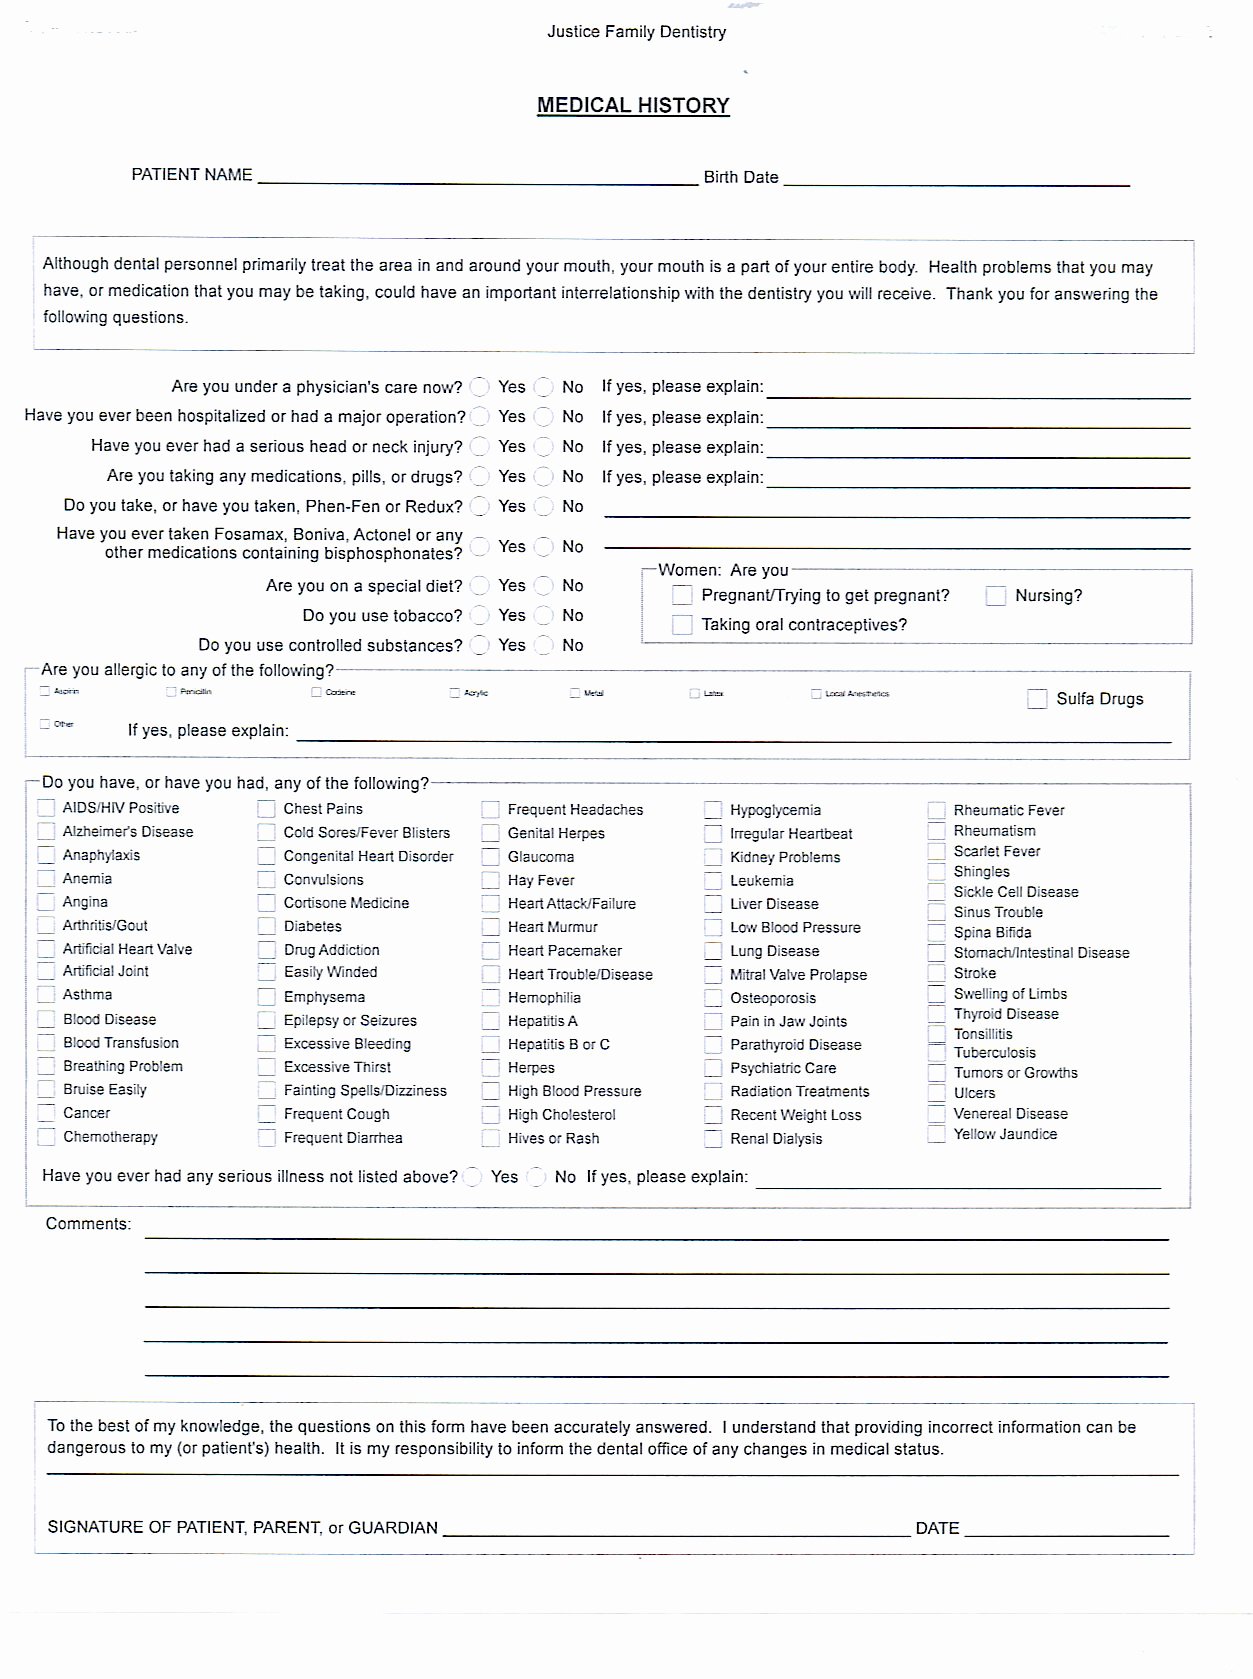 Free Medical History Questionnaire Template New Medical History form – Medical form Templates